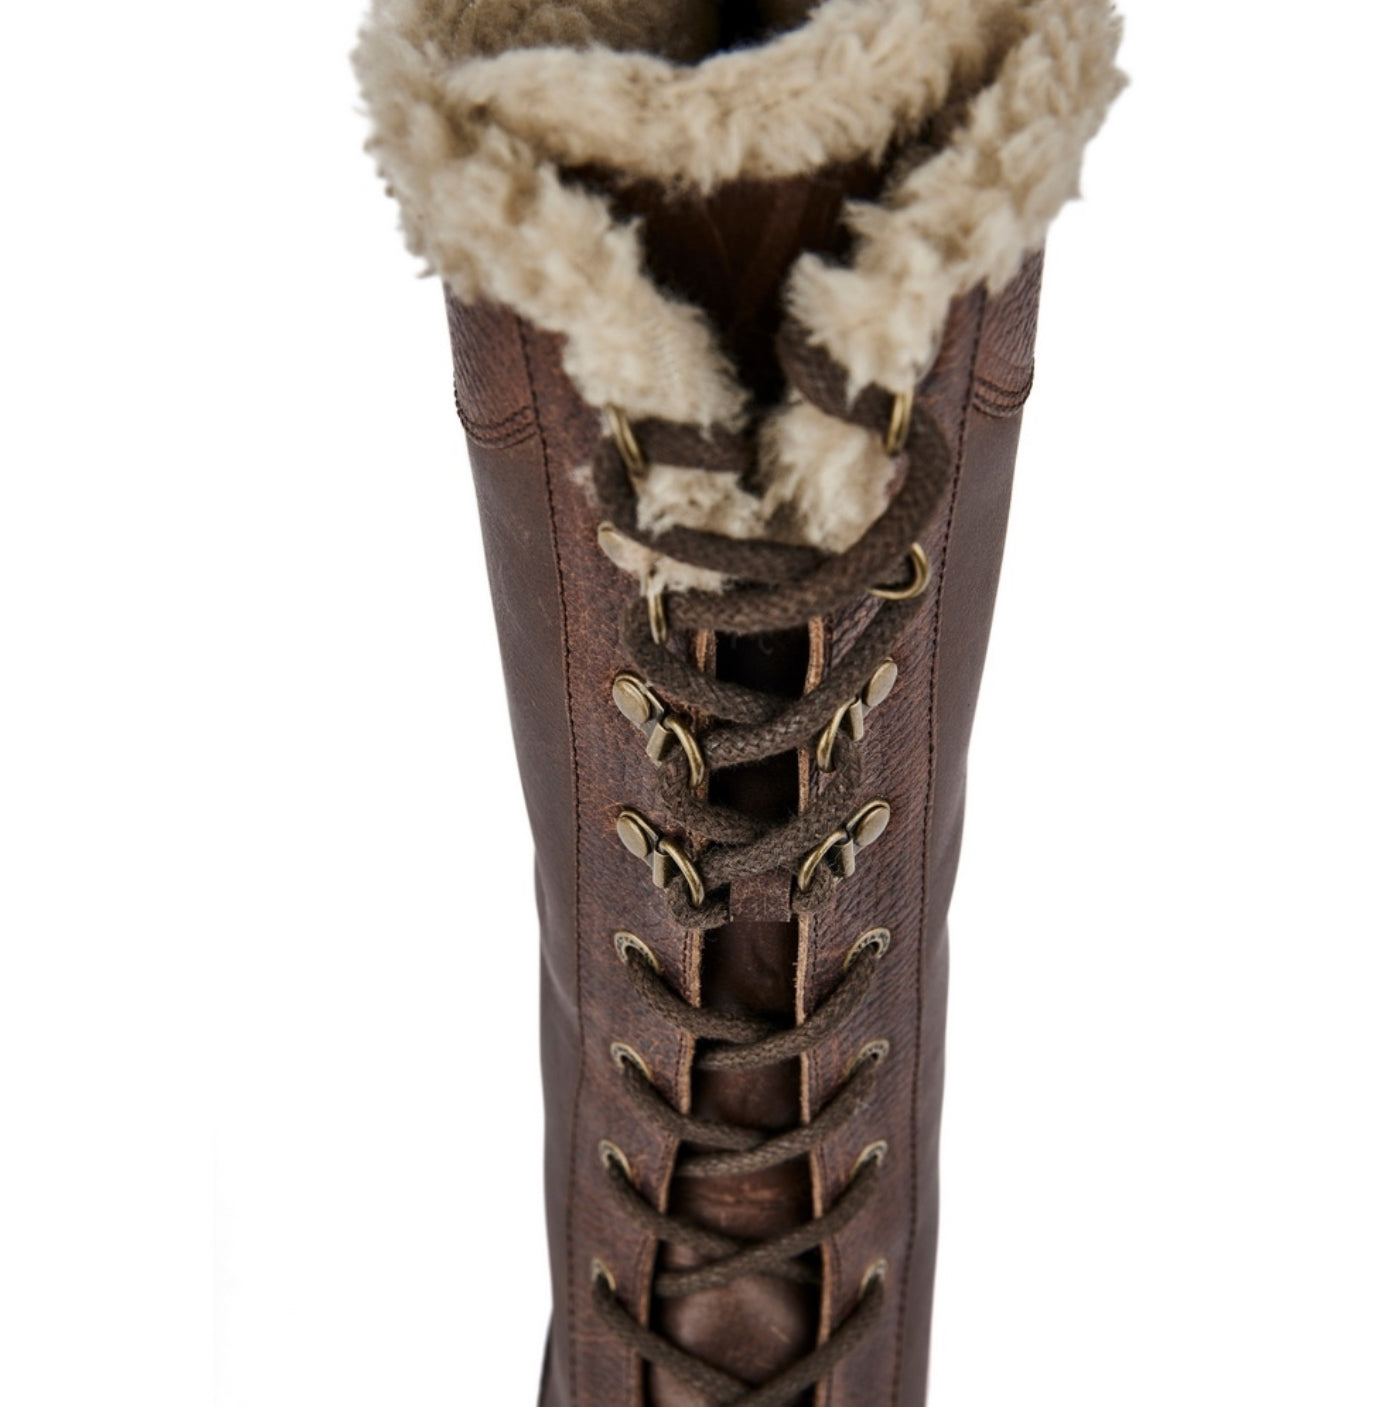 Shires Jovanne Winter Country Boot